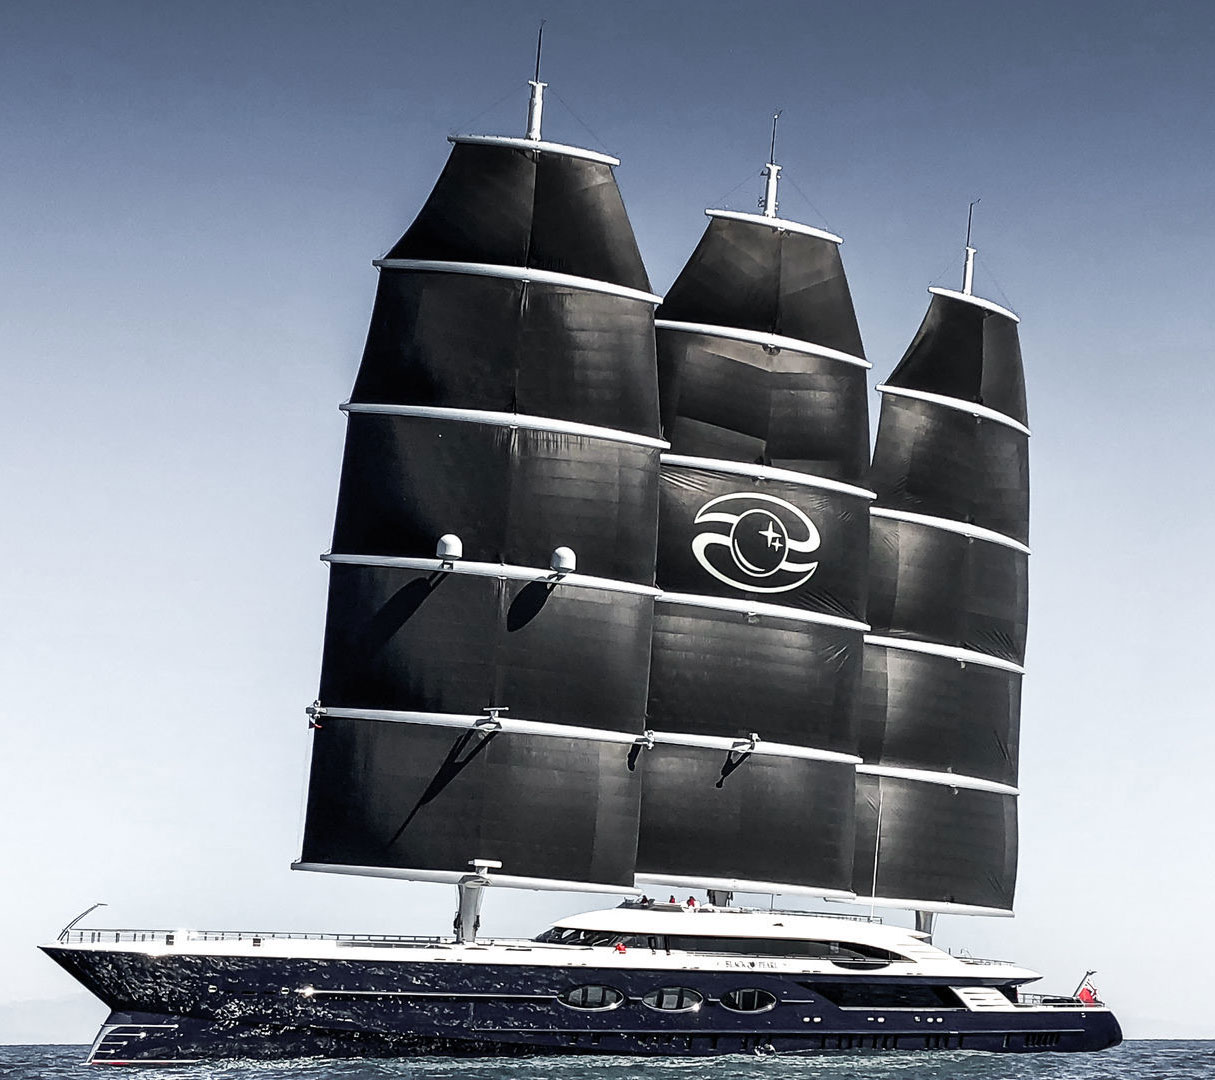 Superyacht Black Pearl pictured sailing